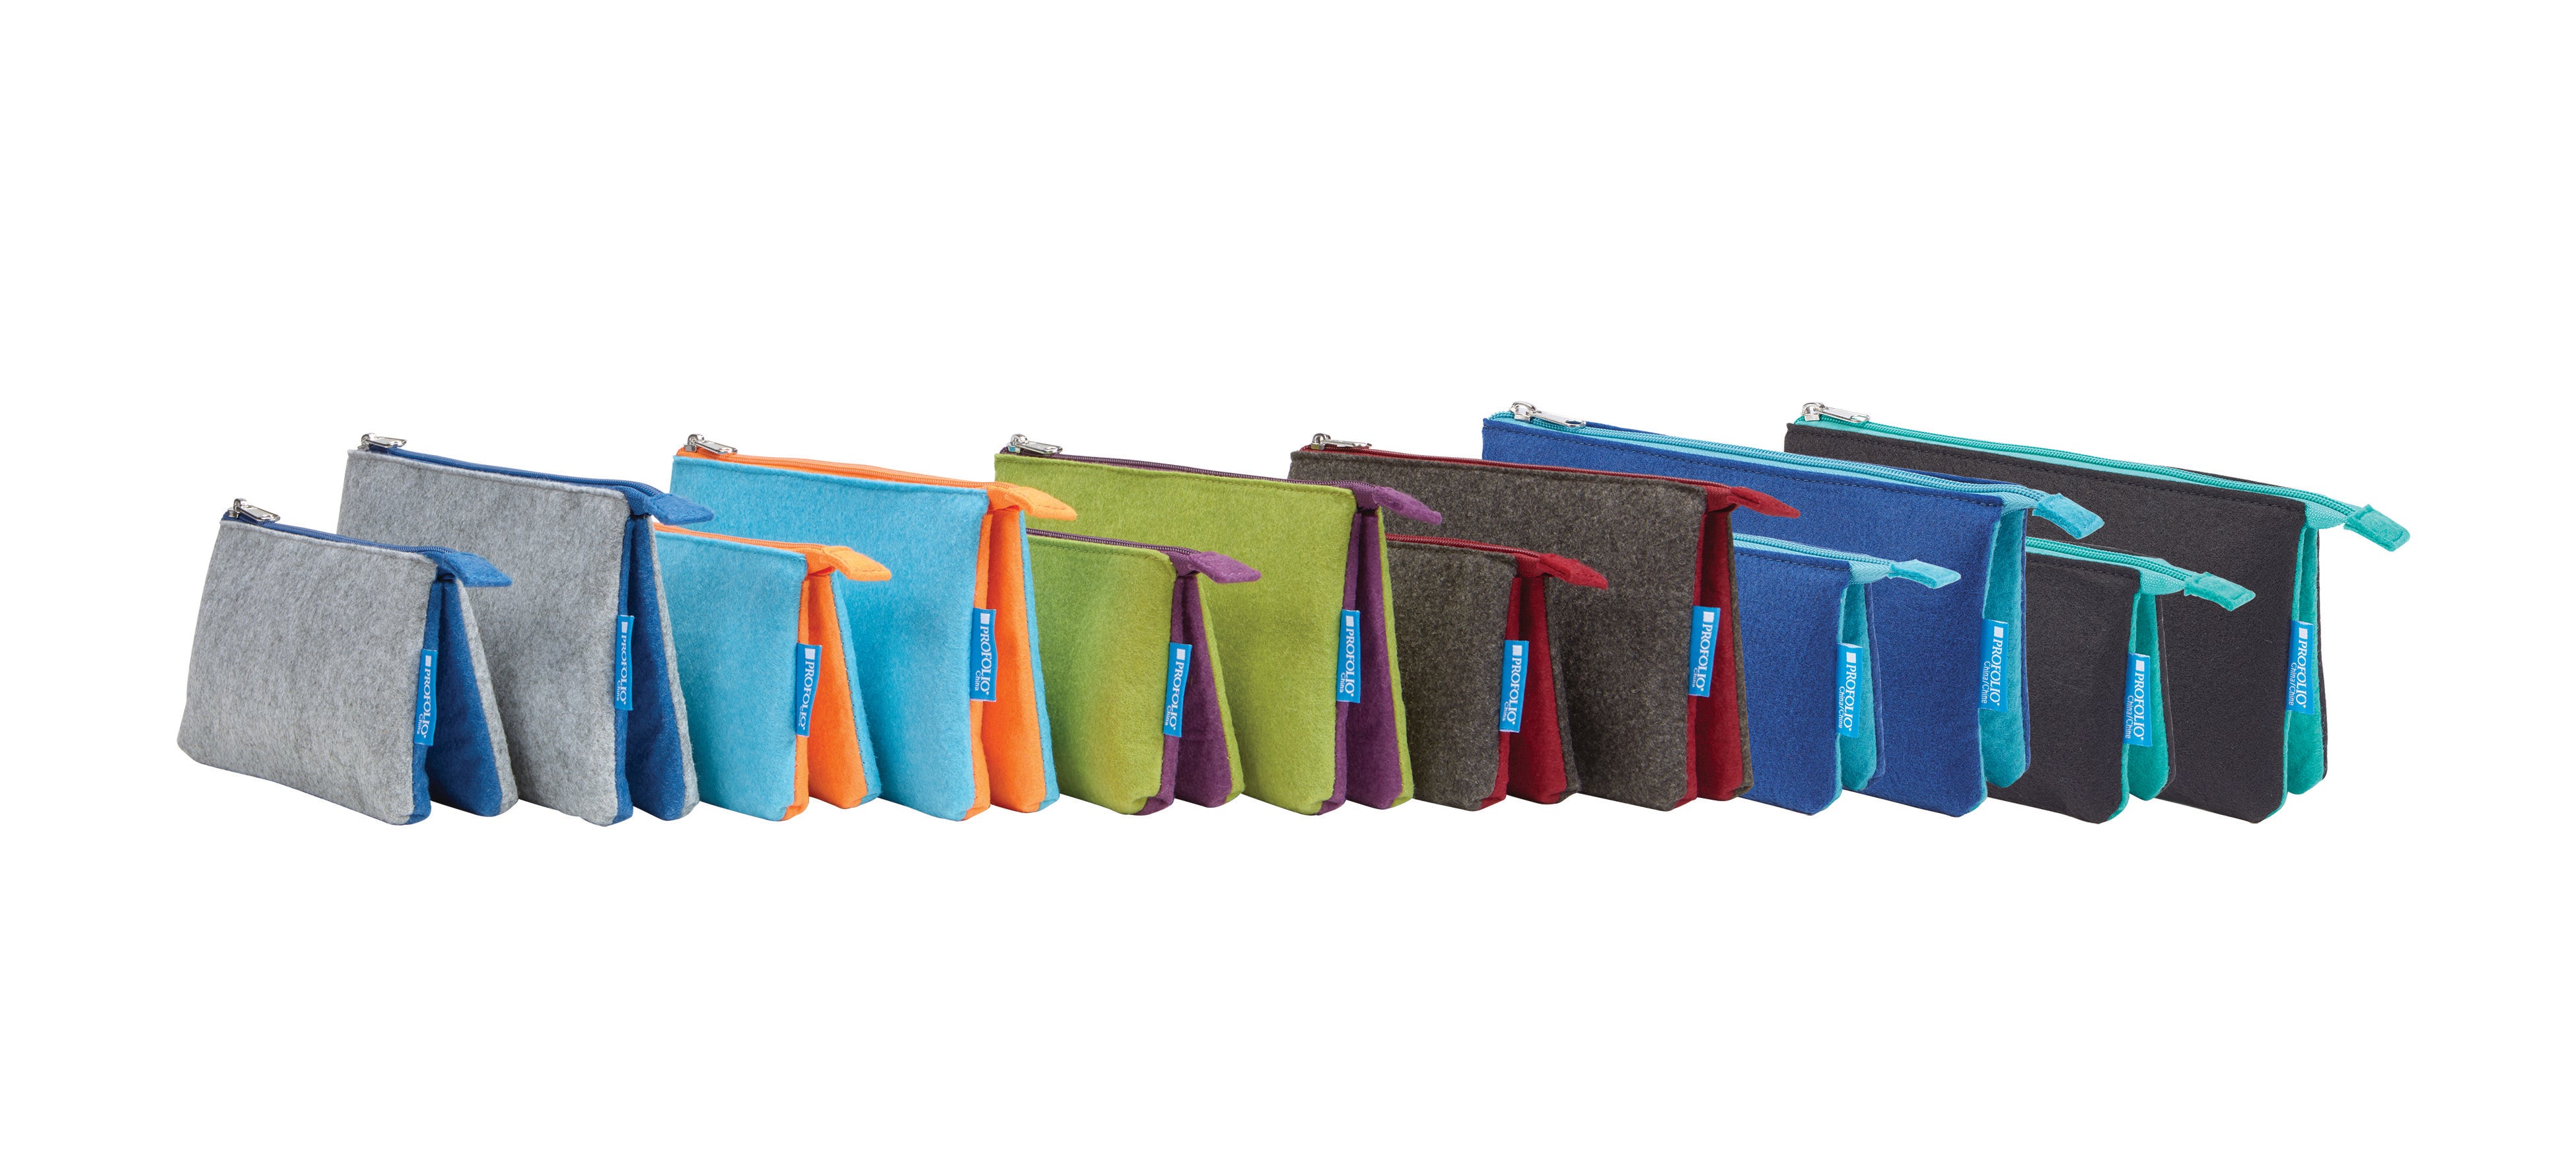 Itoya Profolio Midtown pouches are available in 4 by 7 or 5 by 9 inch sizes.